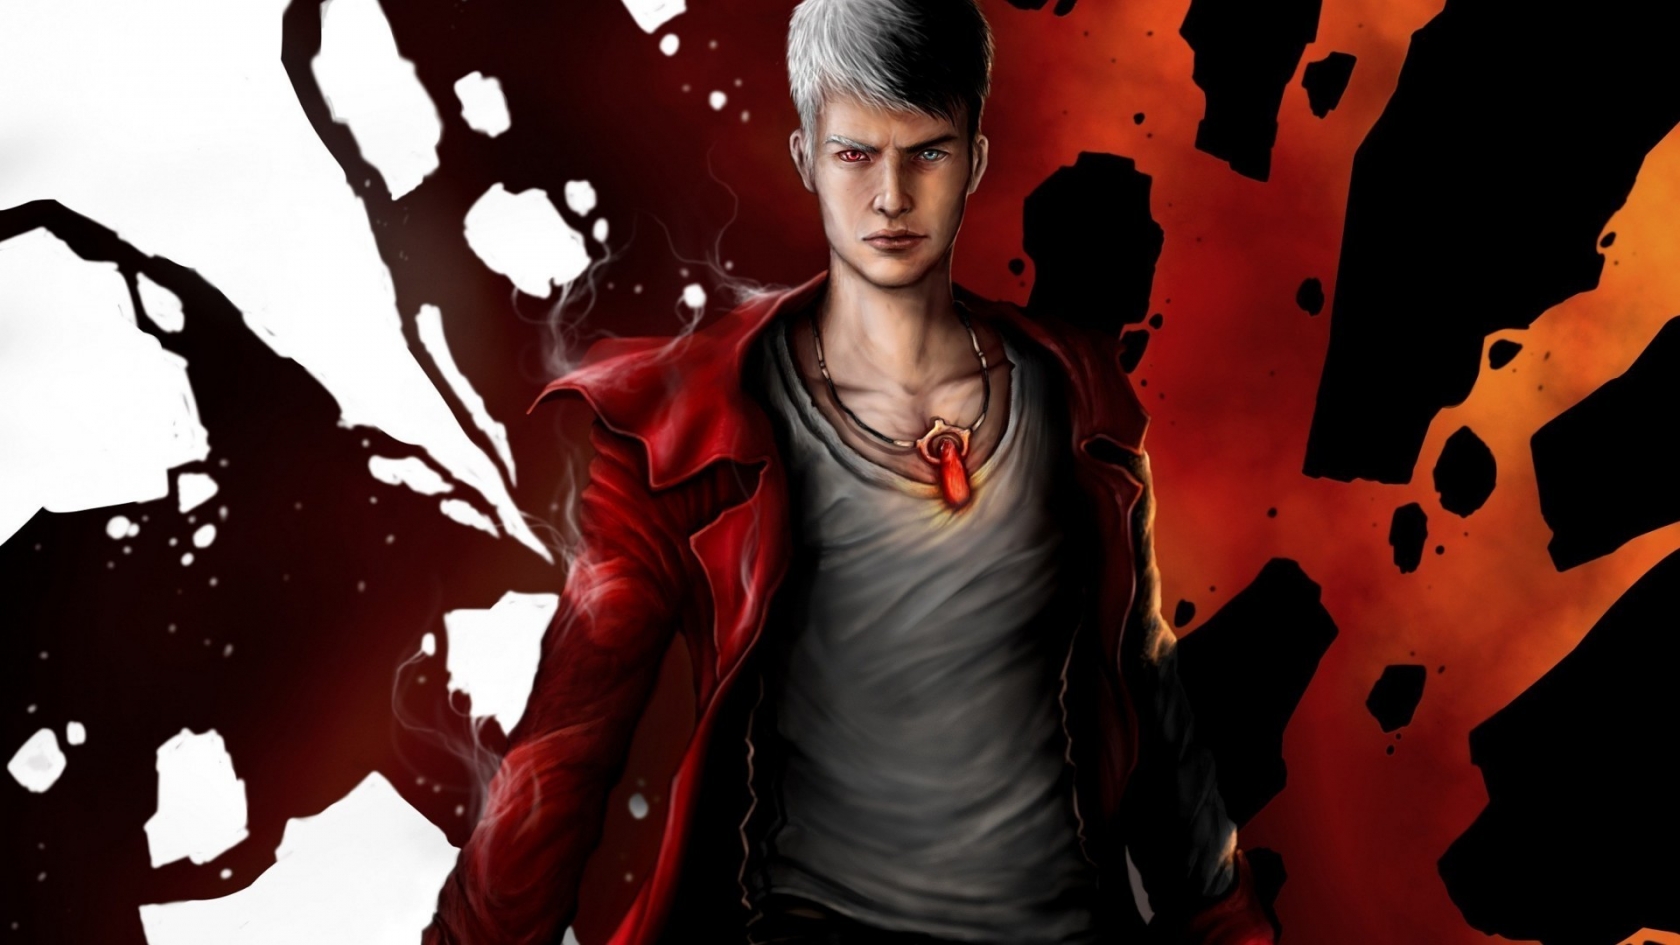 Dante from Devil May Cry for 1680 x 945 HDTV resolution